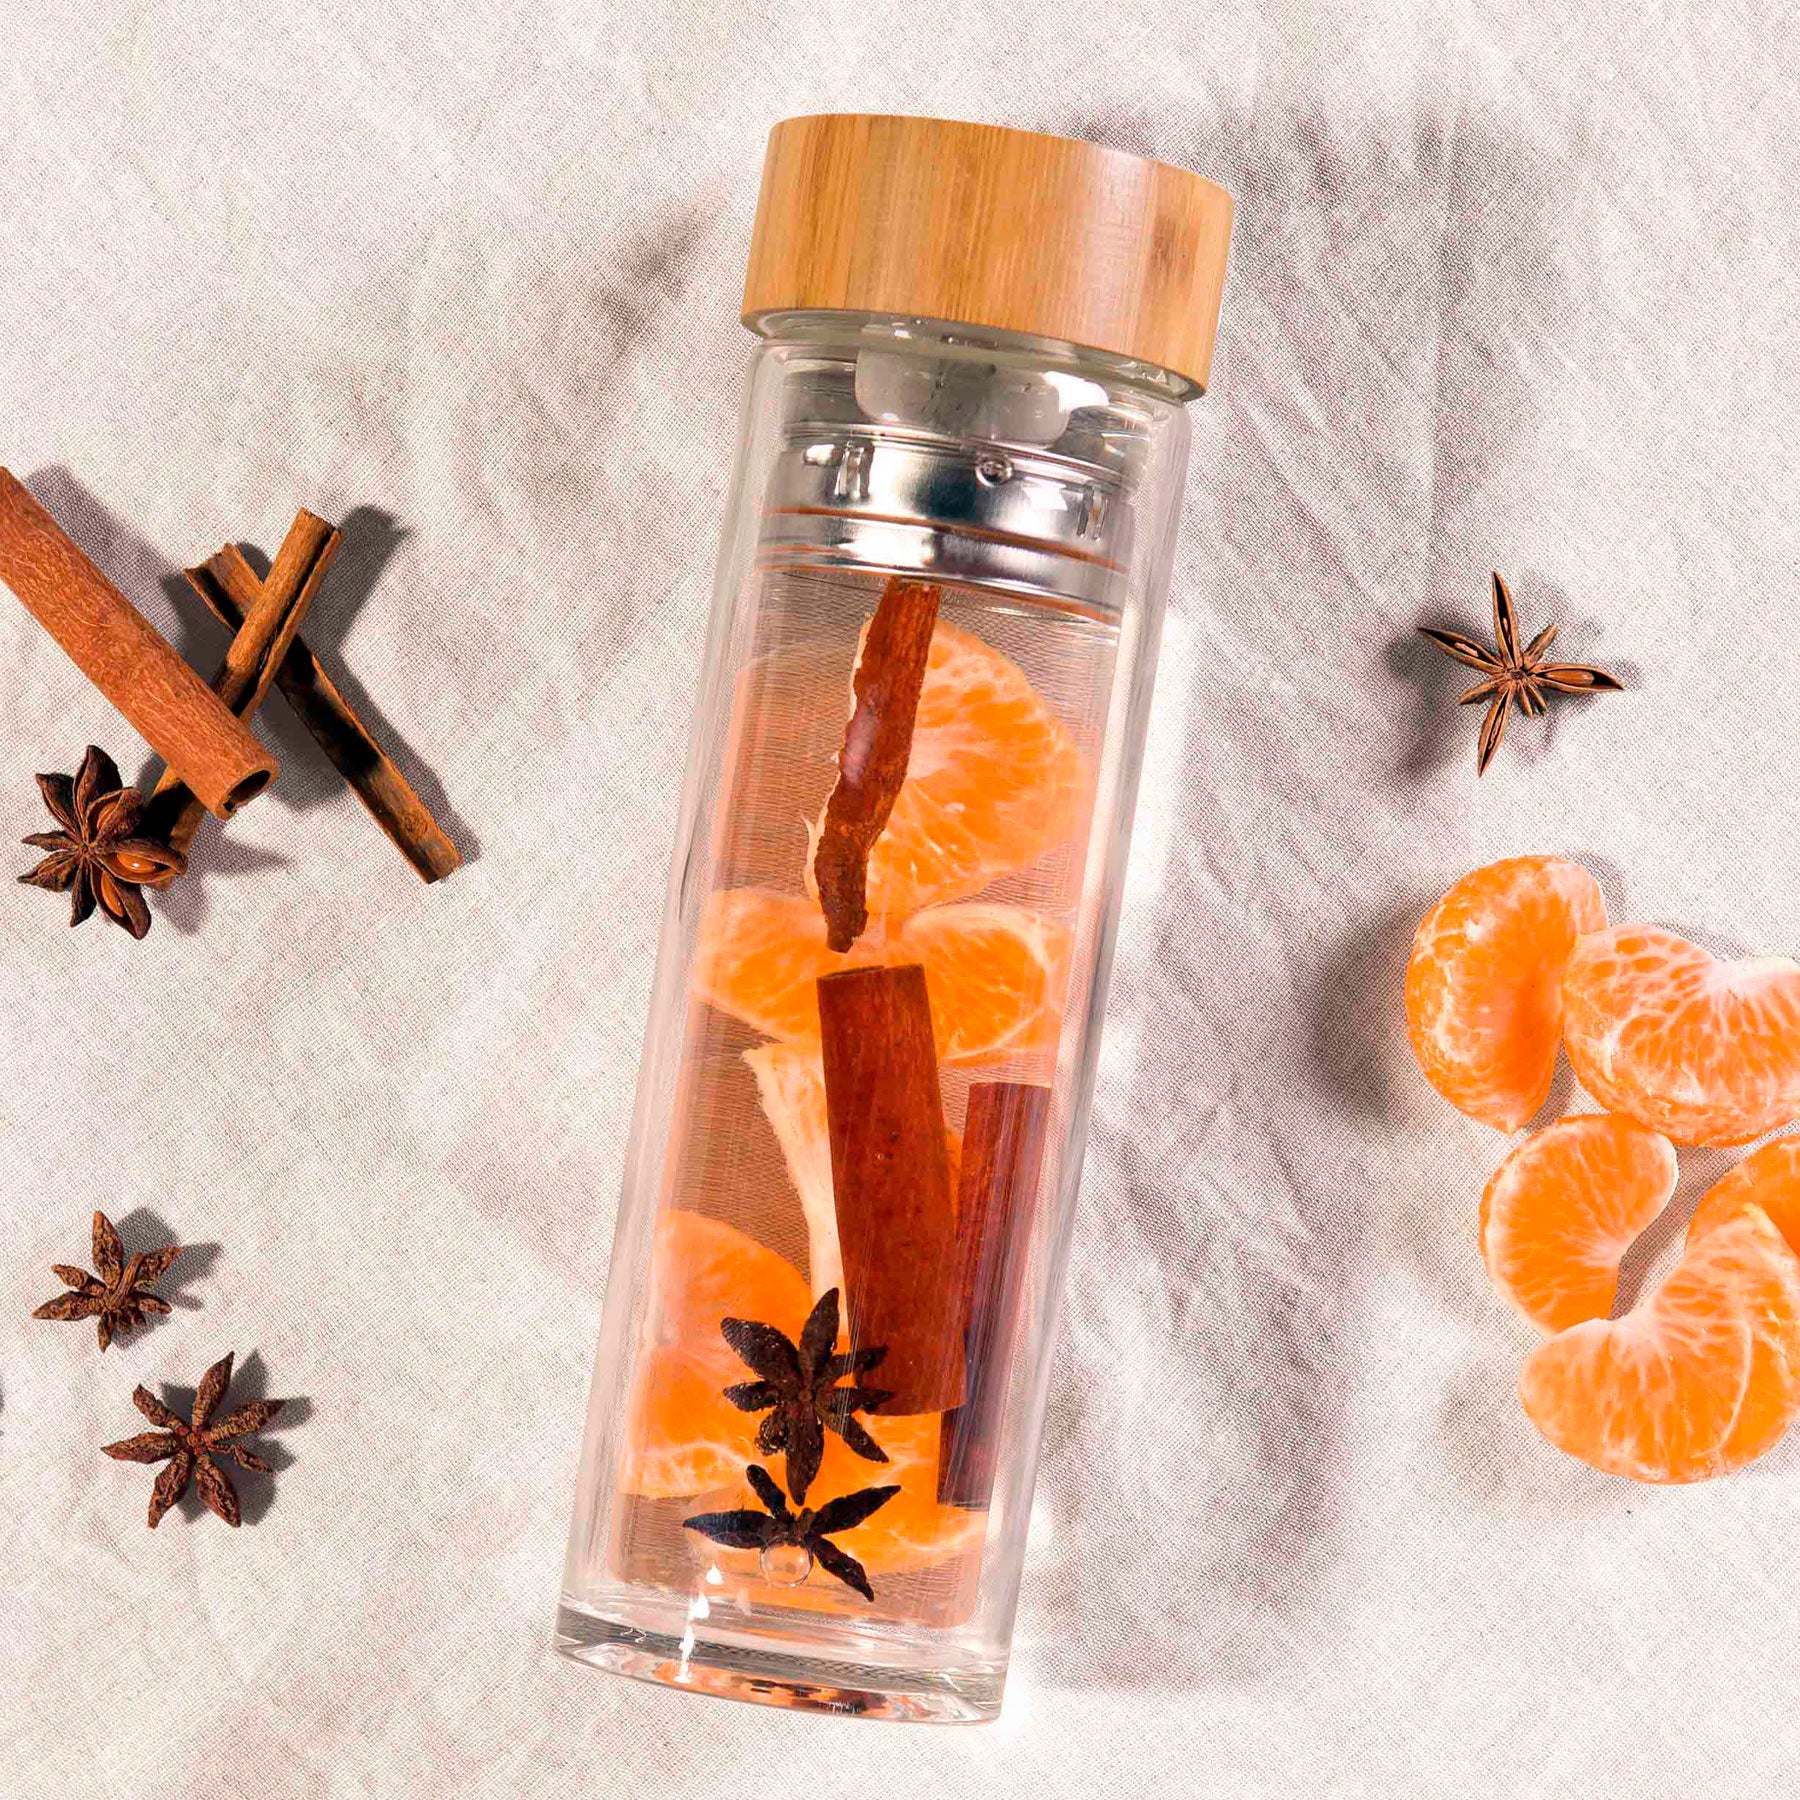 double walled glass drink flask filled with citrus and cinnamon to infuse the water